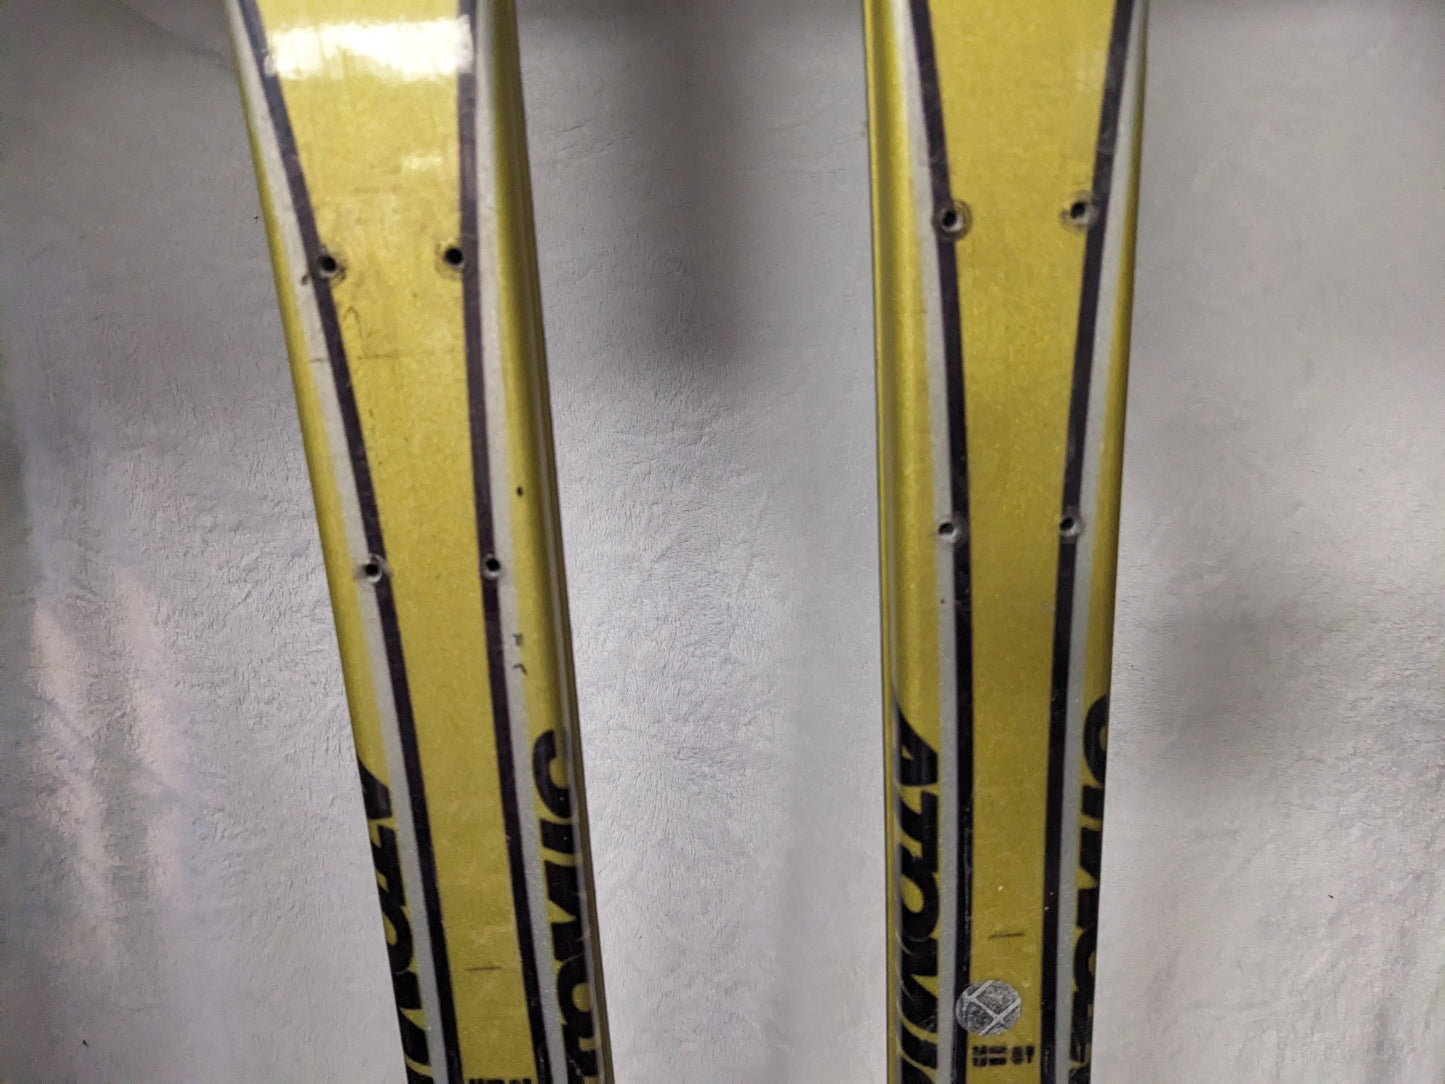 Atomic Beta Race SL=9 Skis *No Bindings* Size 140 Cm Color Green Condition Used